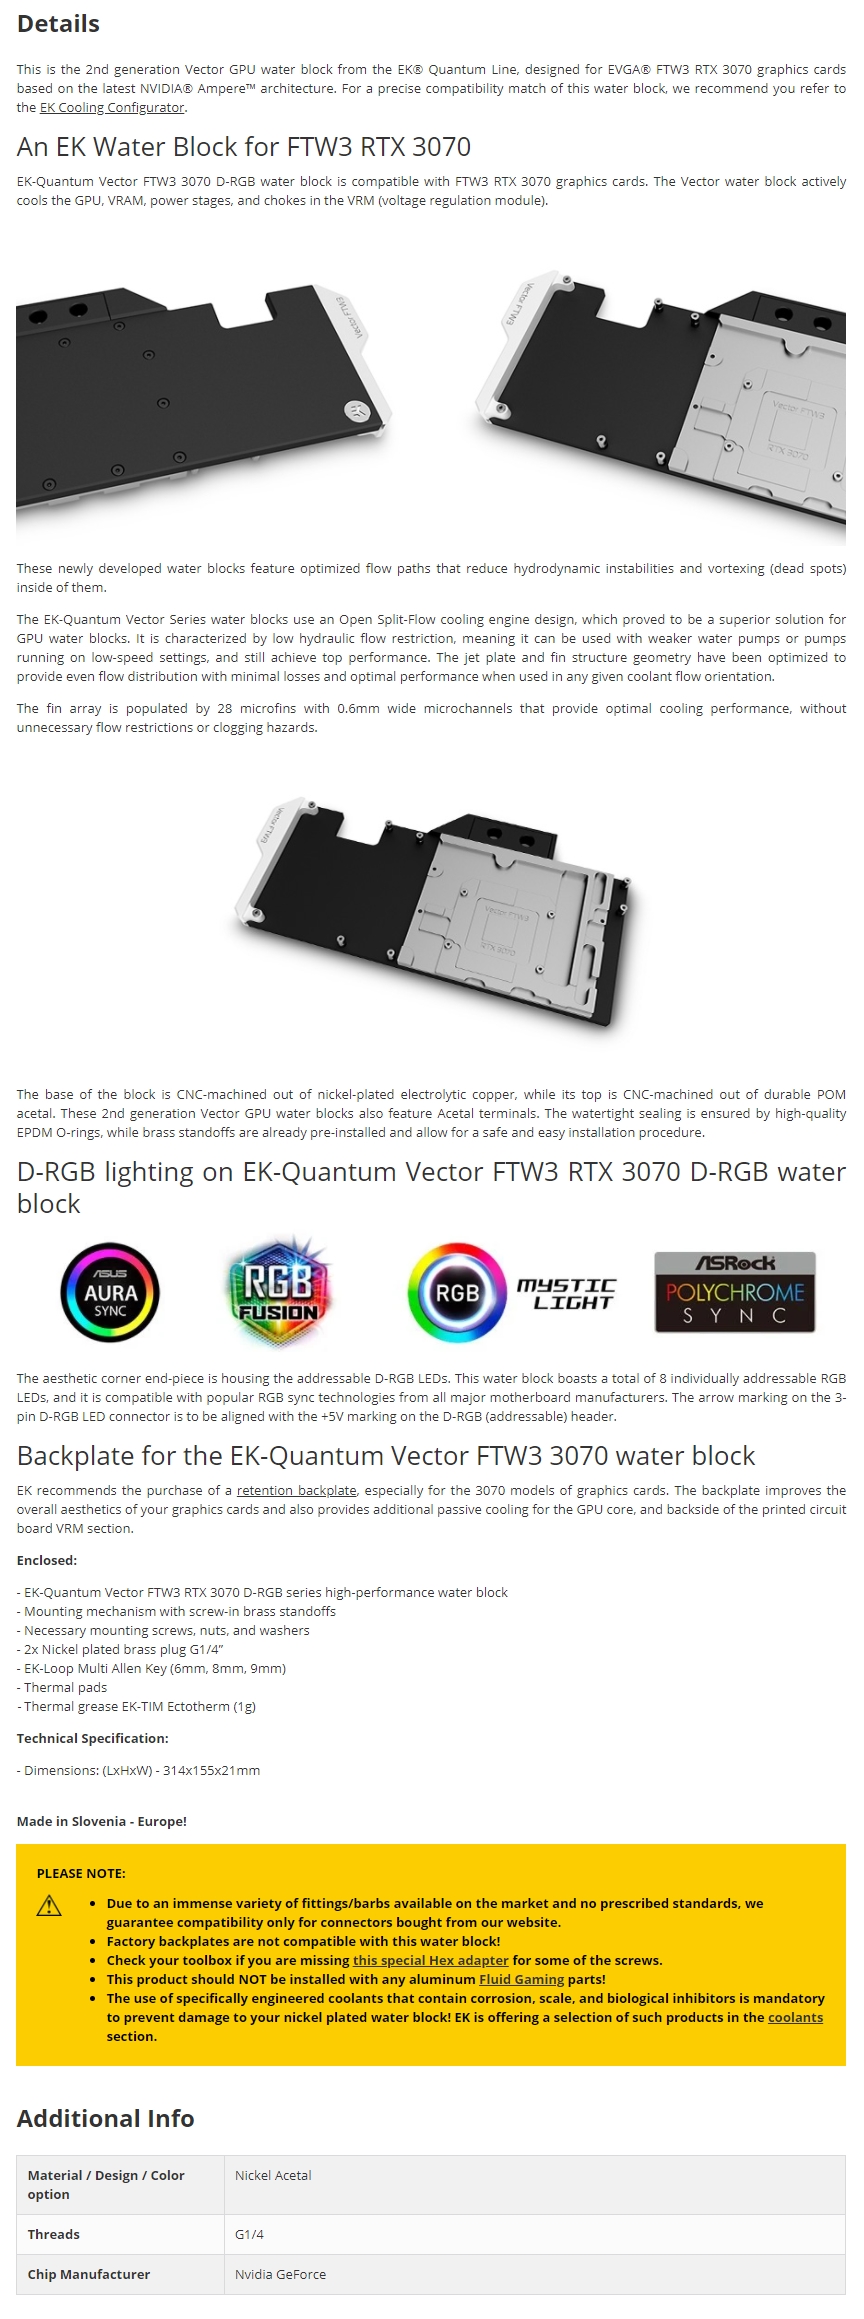 A large marketing image providing additional information about the product EK Quantum Vector FTW3 RTX 3070 D-RGB Nickel Acetal GPU Waterblock - Additional alt info not provided